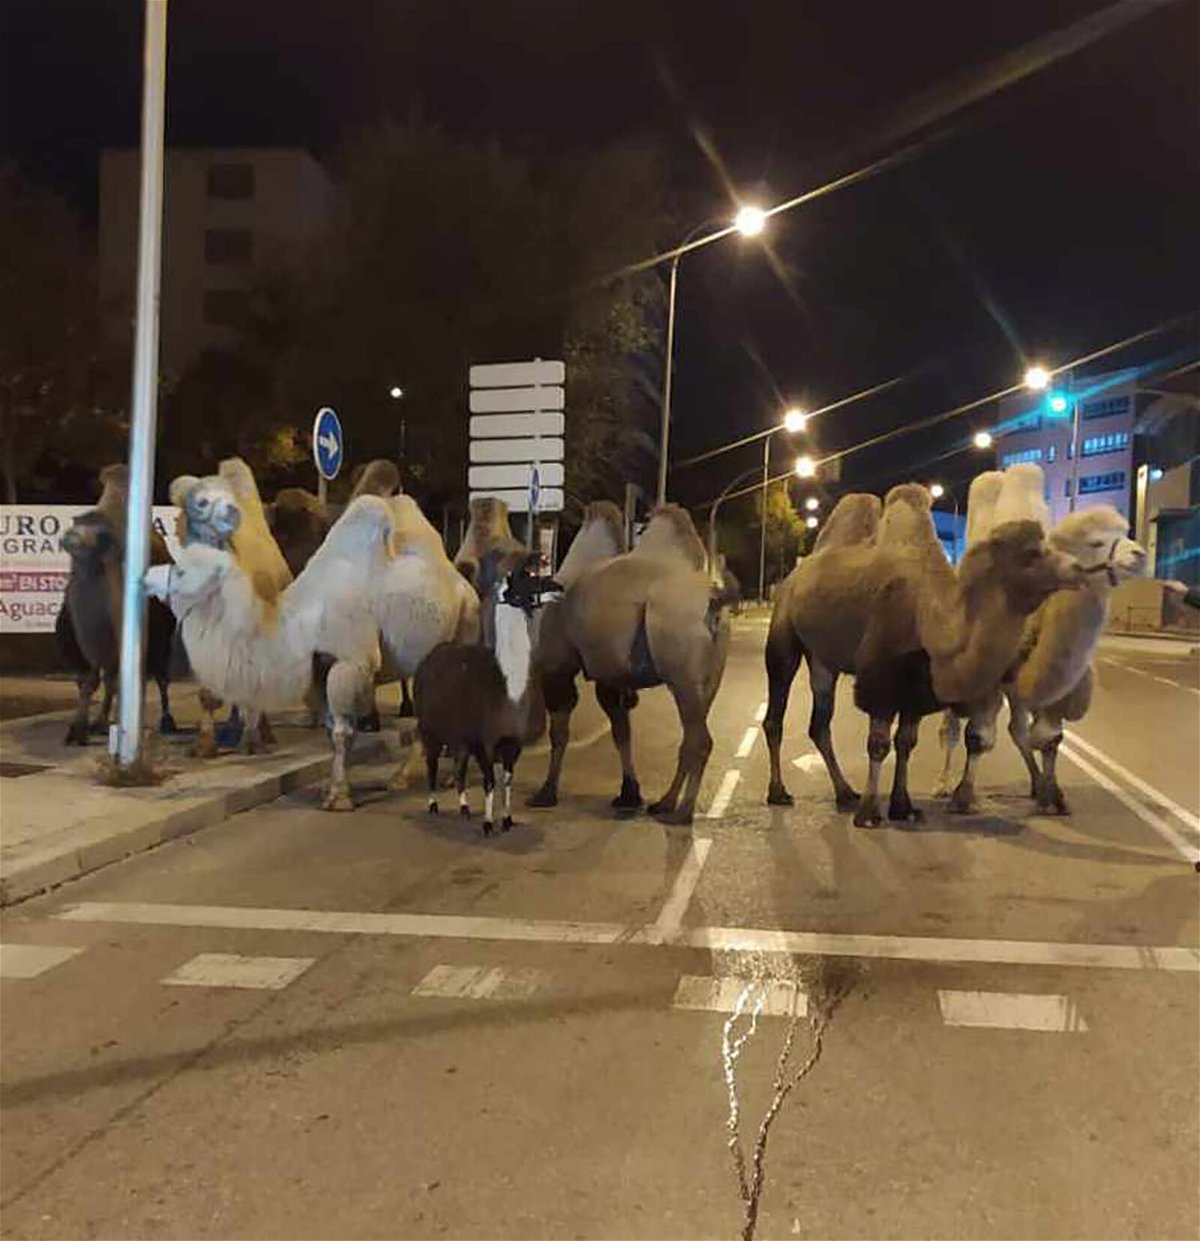 <i>Policía Nacional</i><br/>The escaped camels are pictured exploring the Madrid streets on Friday night.